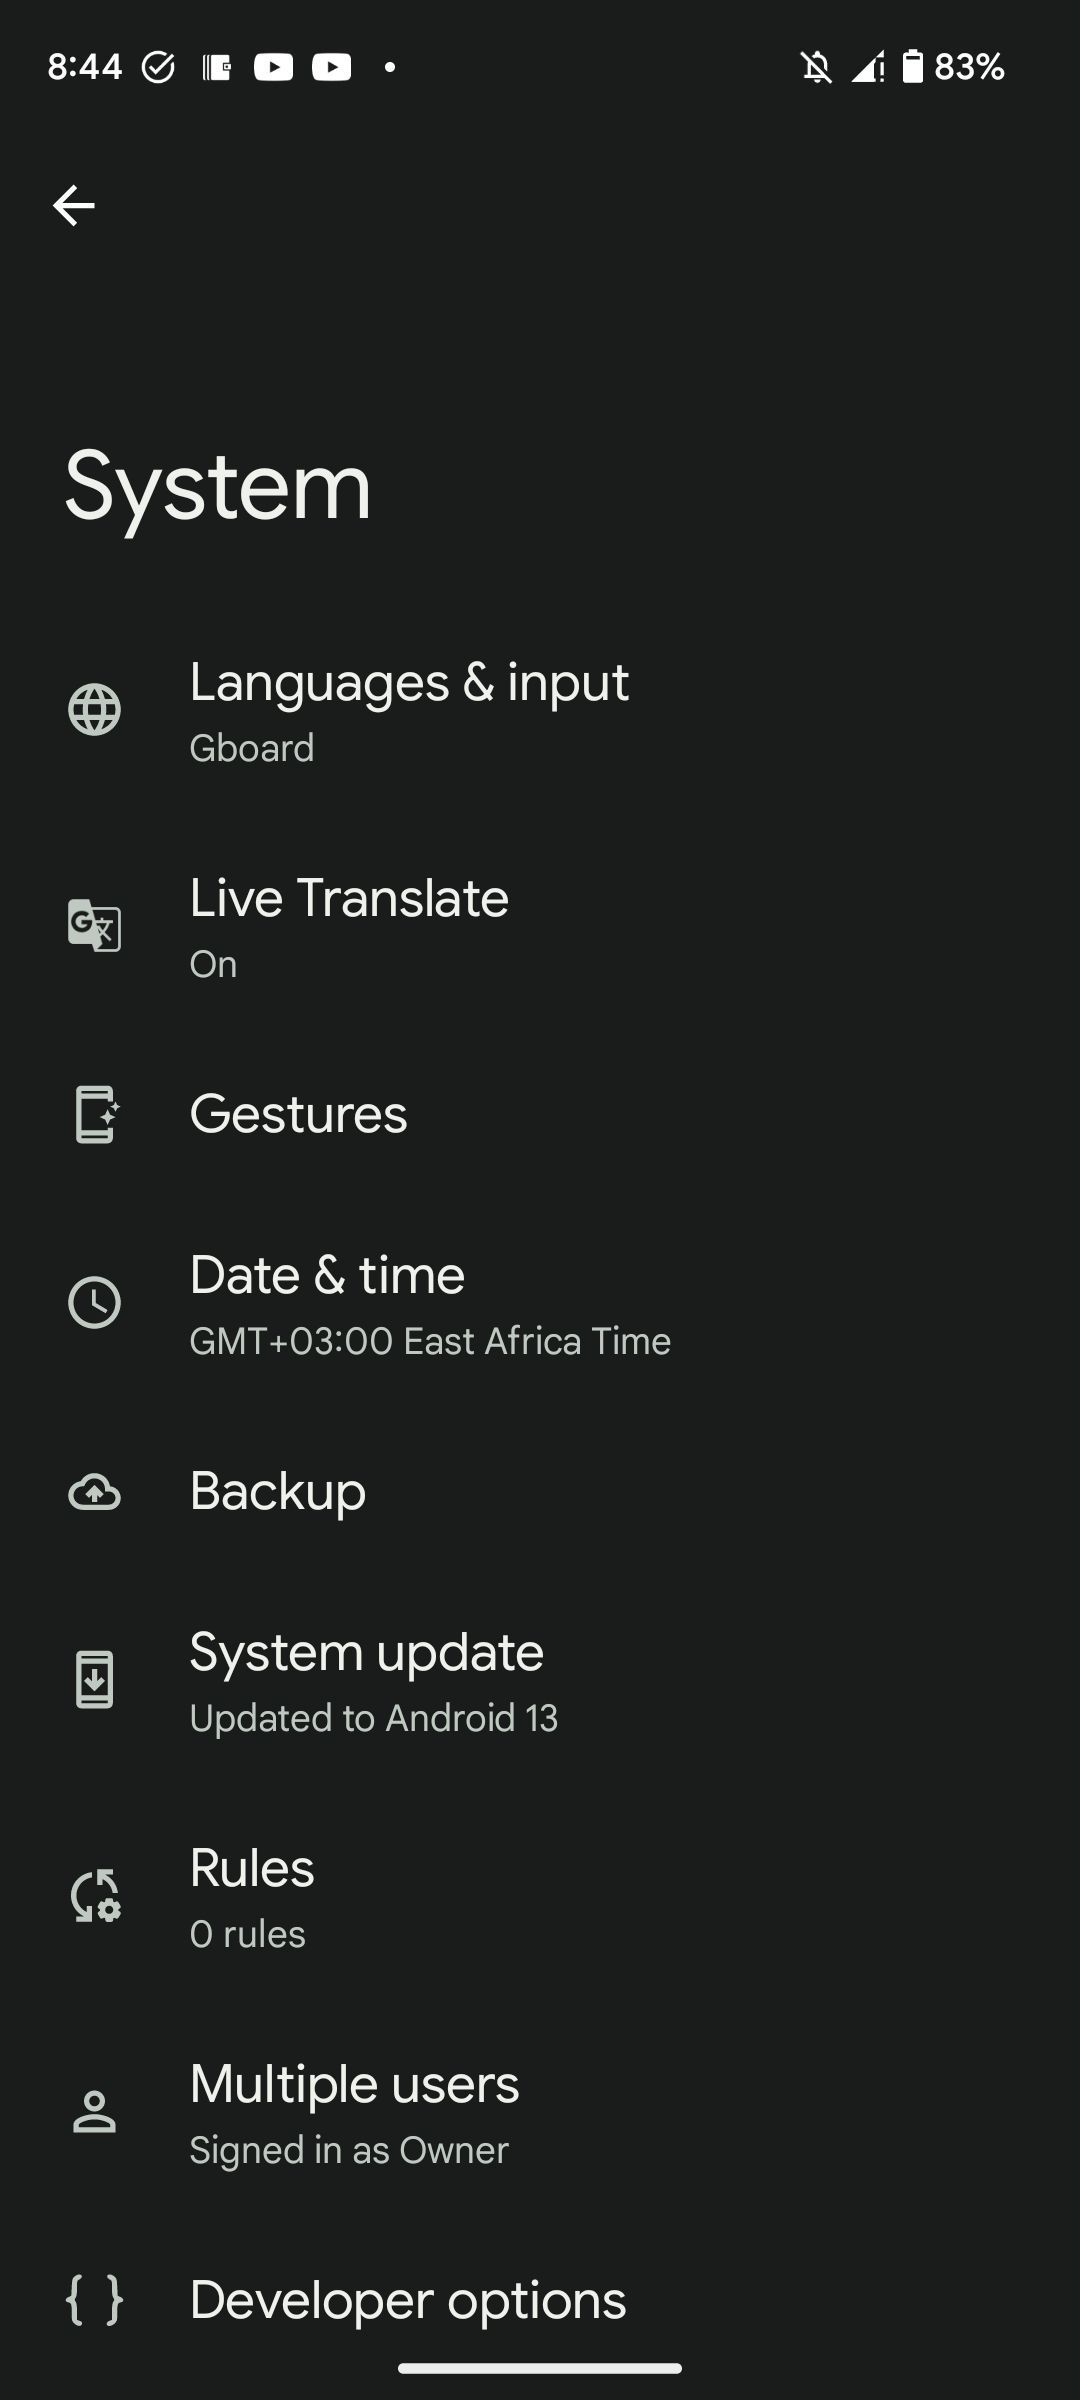 System settings page in Android 